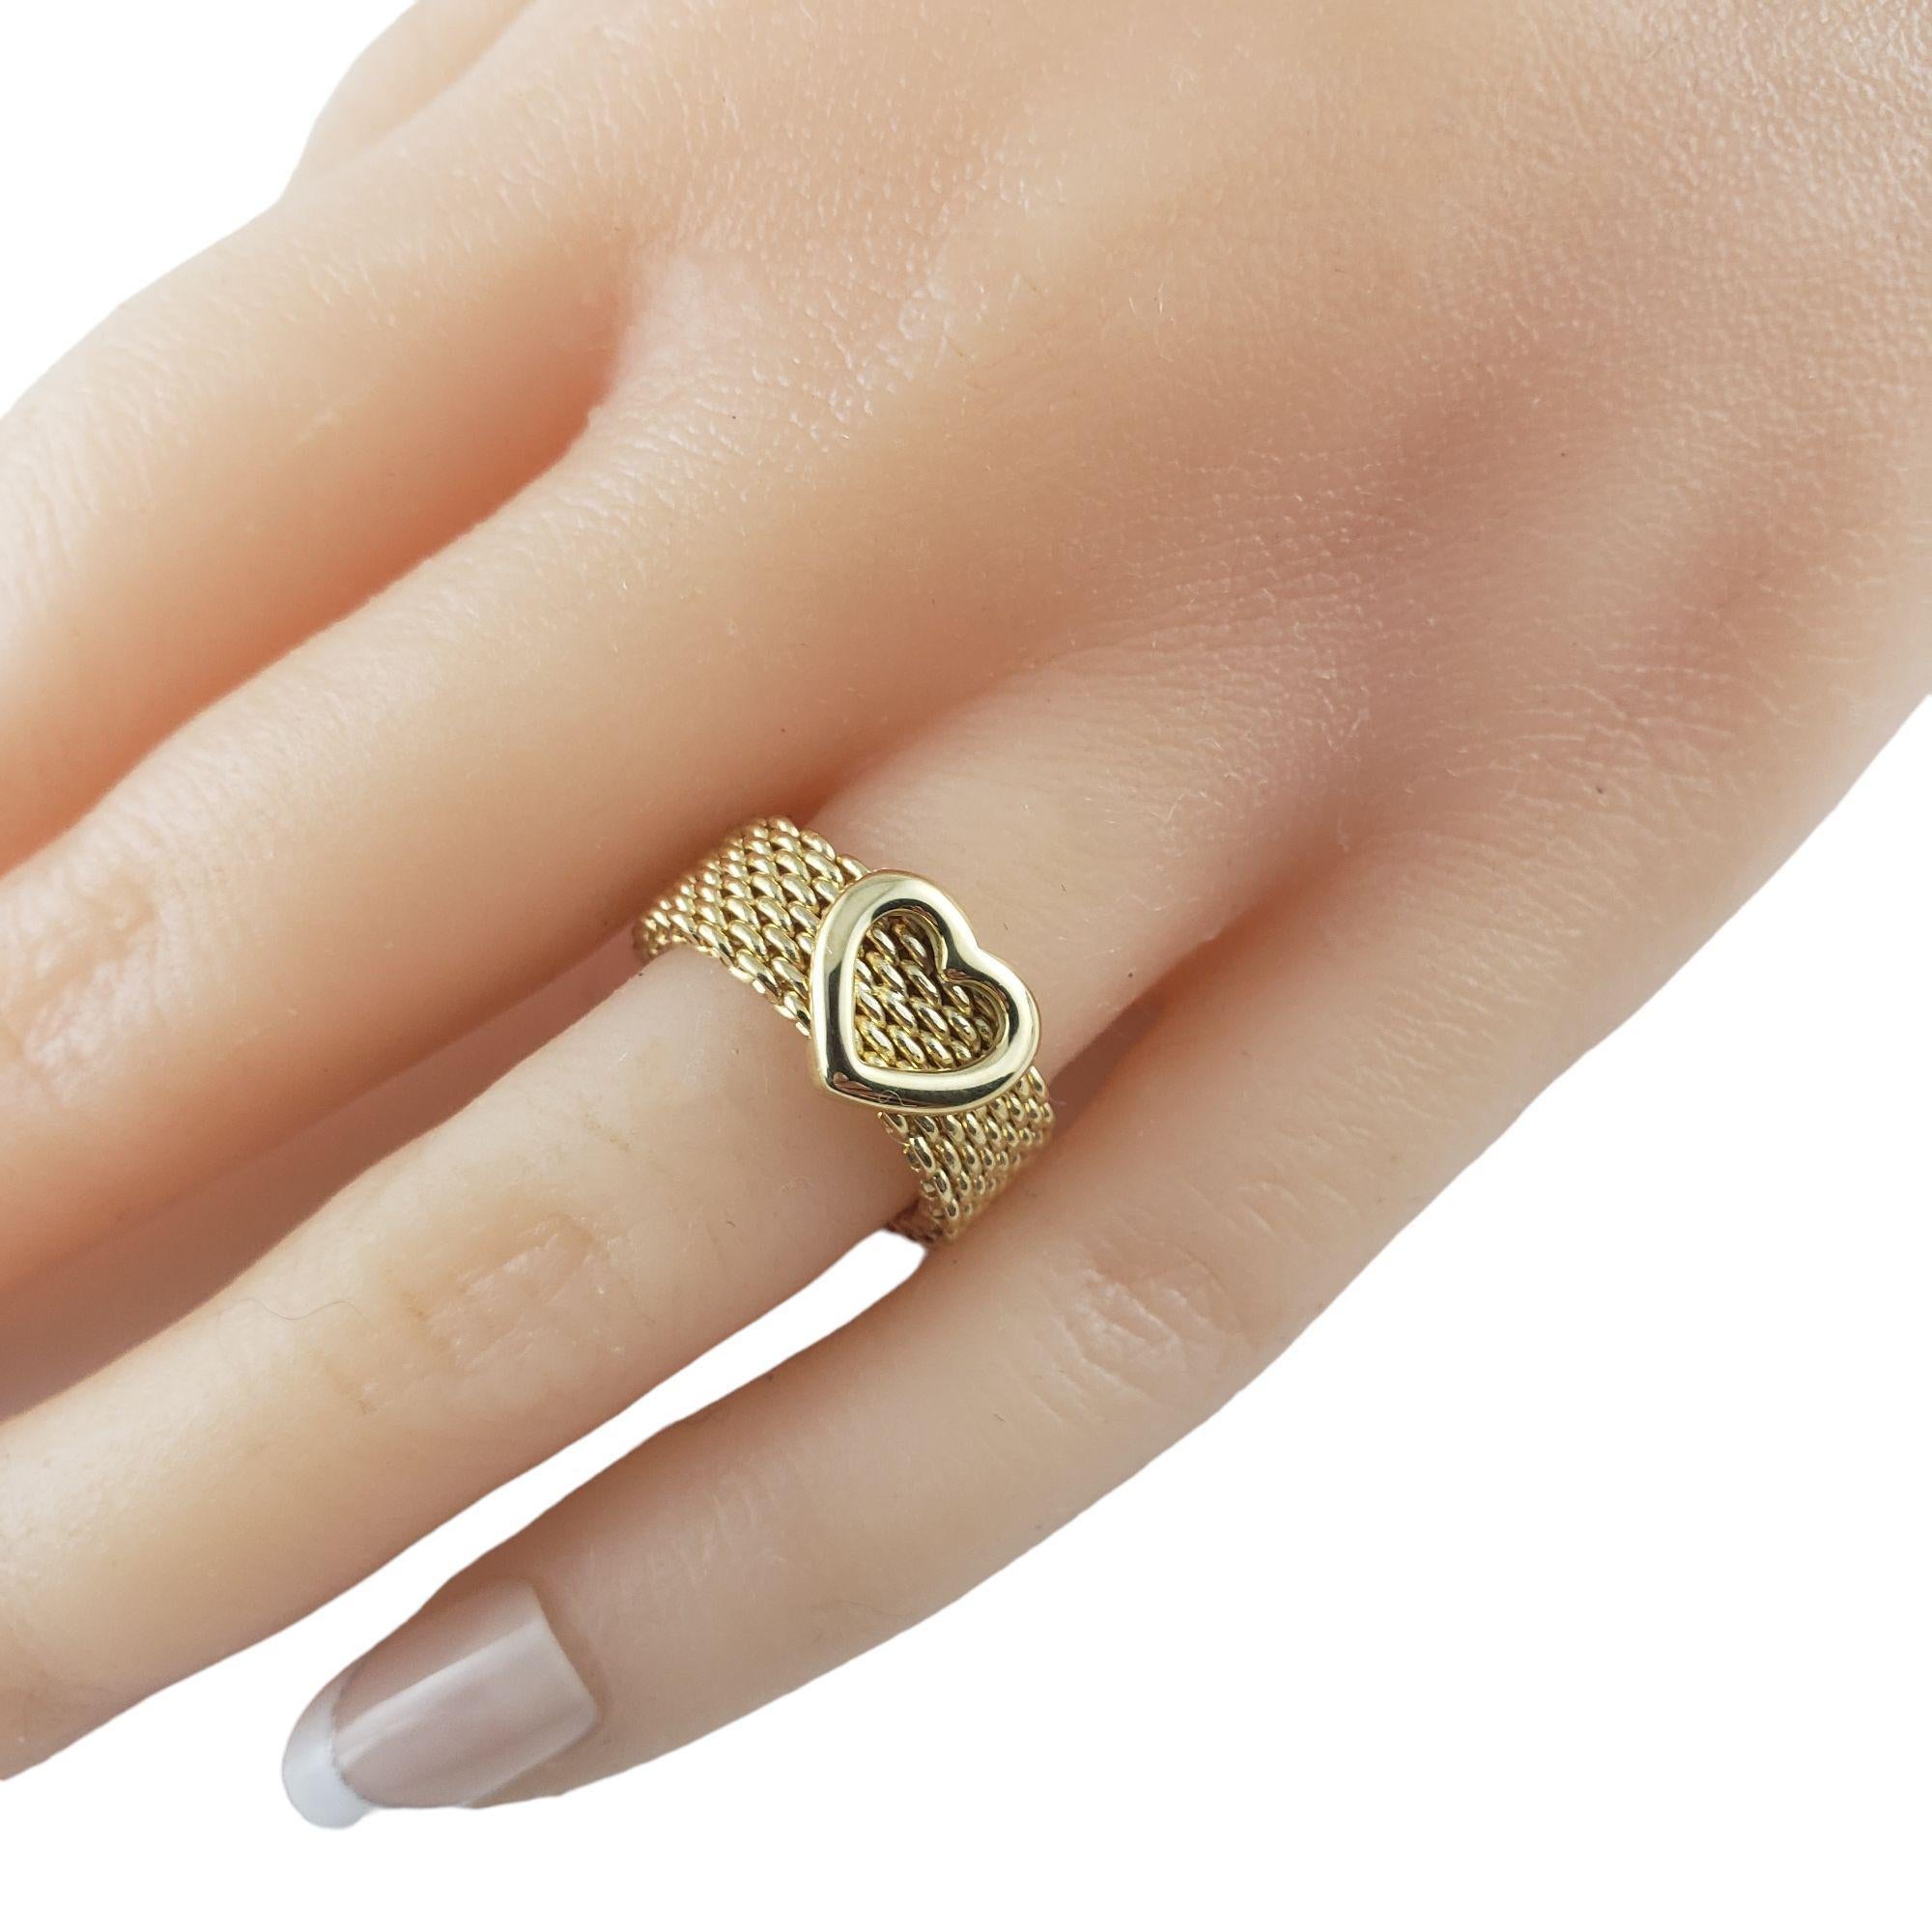 Tiffany & Co. 18 Karat Yellow Gold Somerset Heart Mesh Ring Size 5 #16918 For Sale 4